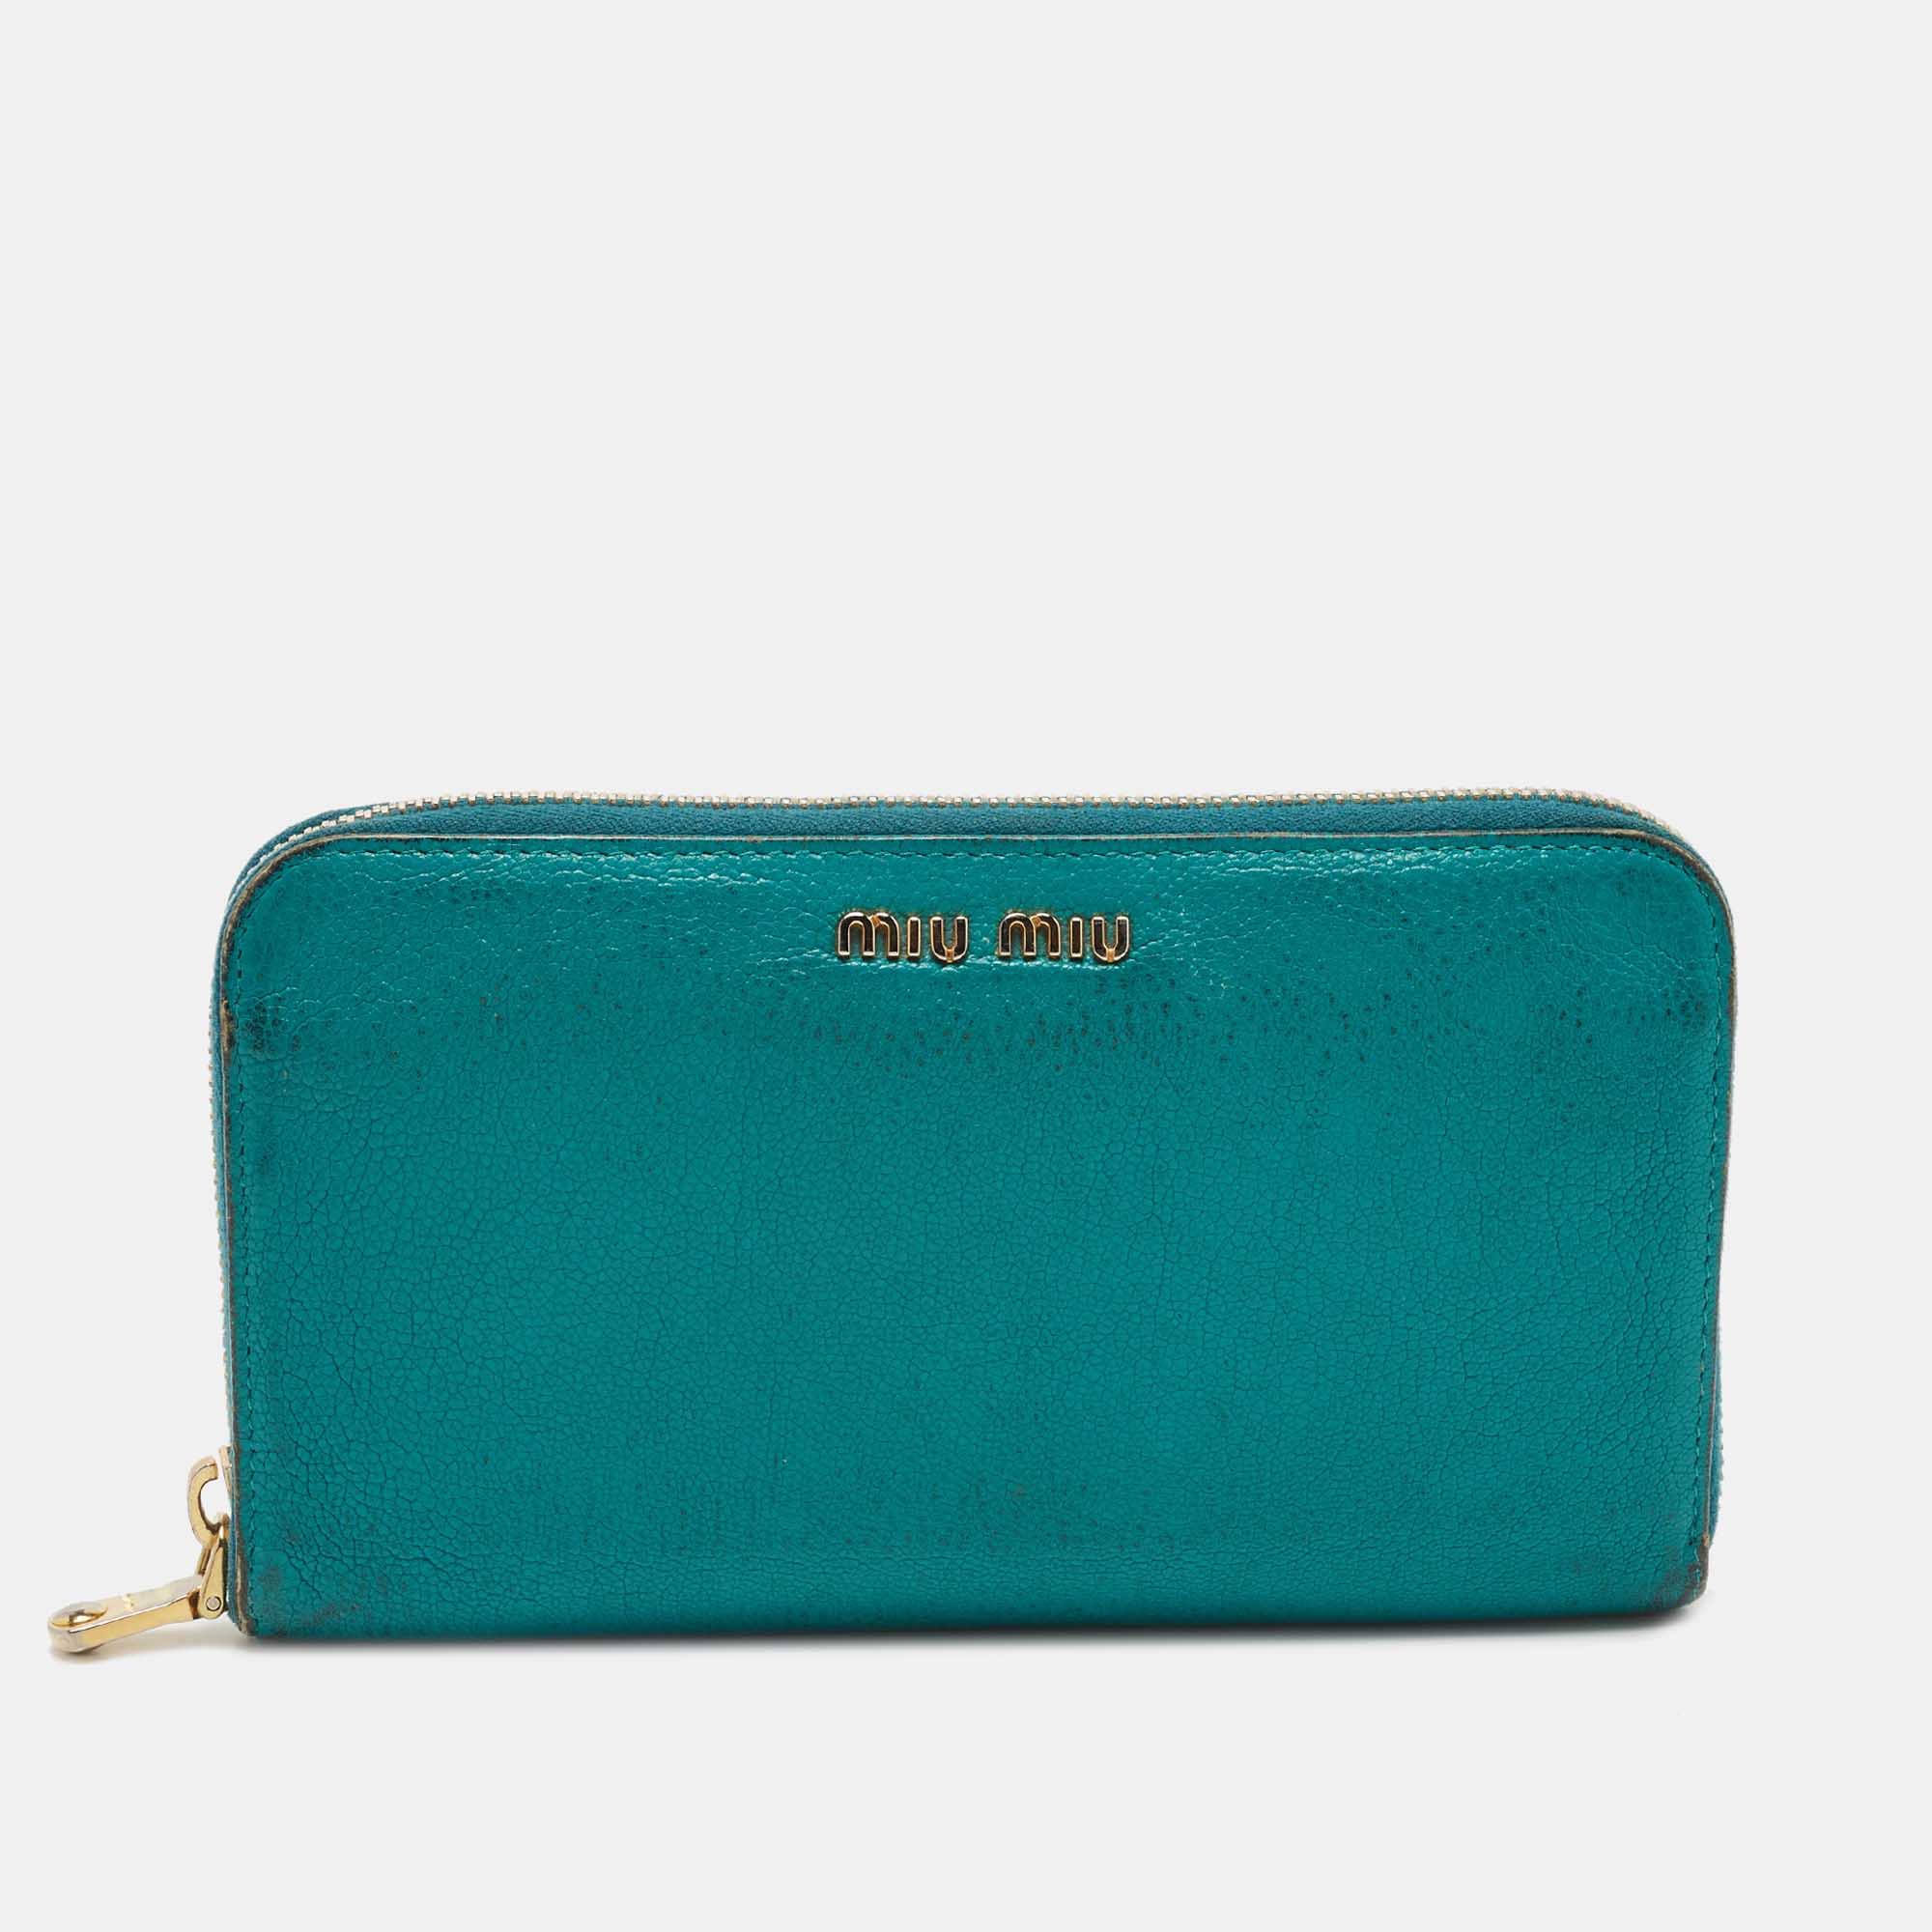 This Miu Miu leather zip around wallet is perfect to be carried solo or inside your tote while you step out to run errands. It is a durable accessory.